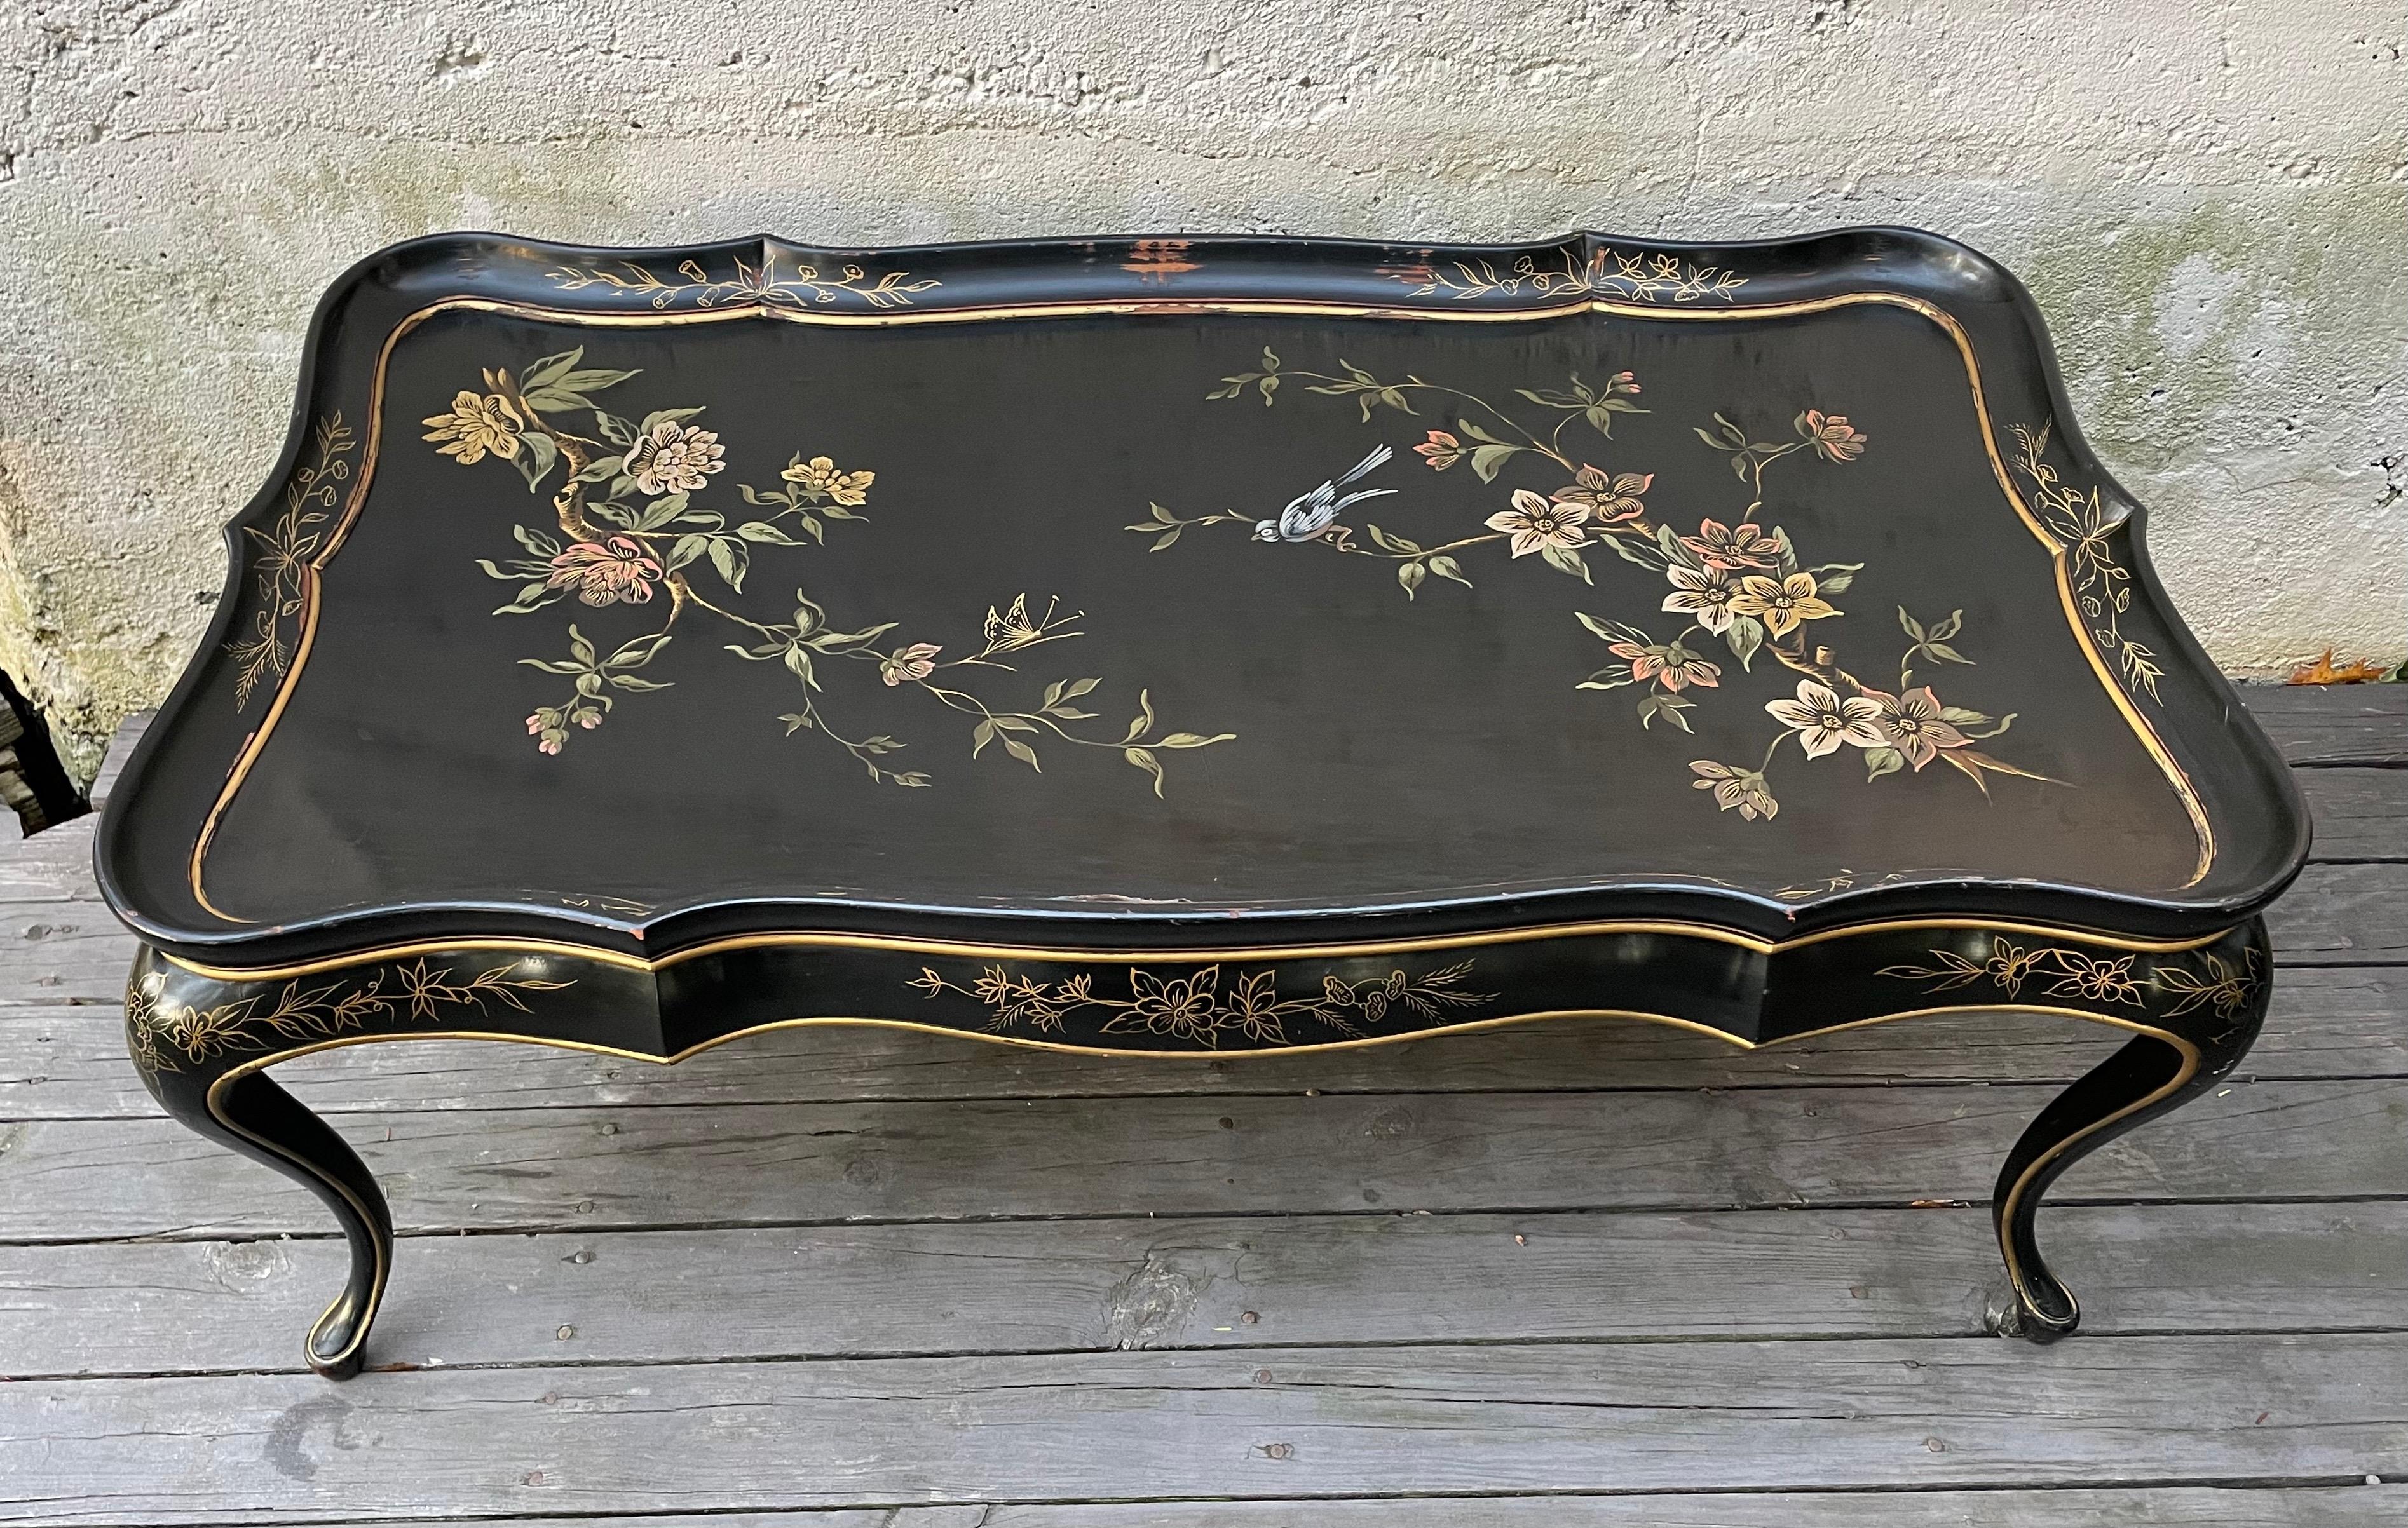 Beautiful Hollywood Regency Japanese black lacquered coffee table with hand painted floral design. Curved tray top with lovely curved legs, all original.